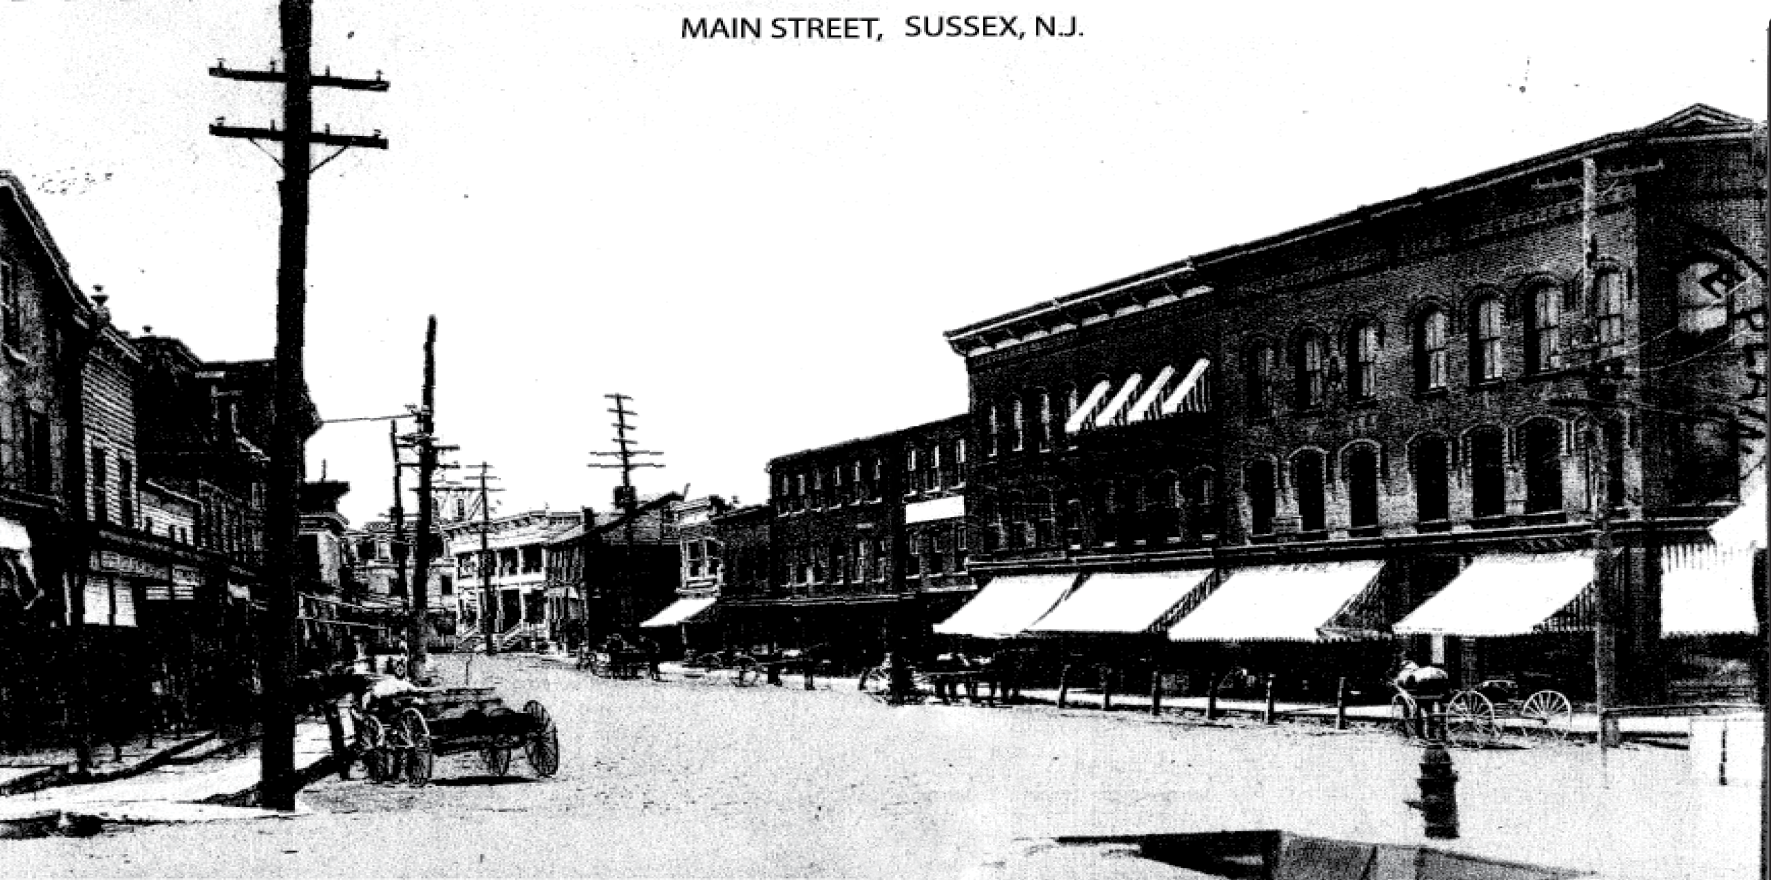 Photo from the early 1900s of Sussex Boro, NJ with utility poles delivering electric power. Source: "Images of America - Sussex and Wantage" by William R. Truran